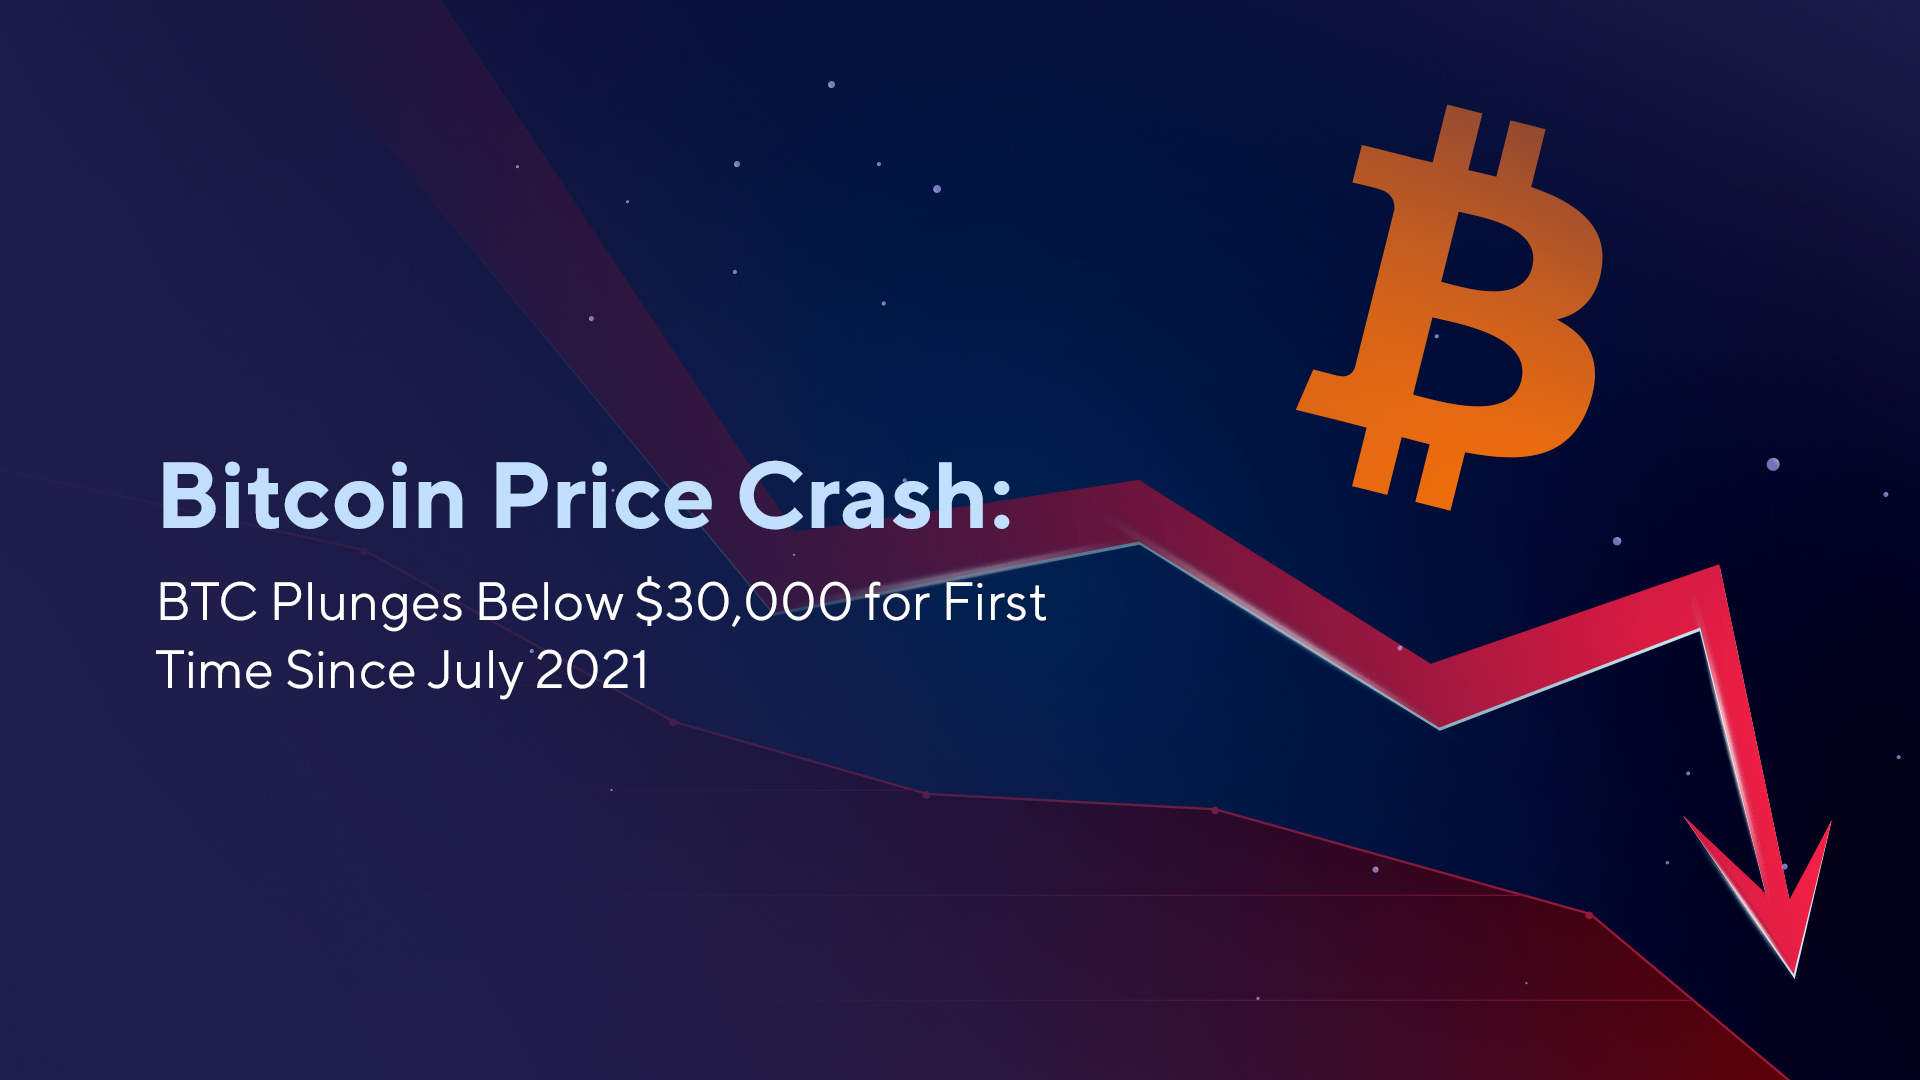 Bitcoin Price Crash: BTC Plunges Below $30,000 for First Time Since July 2021